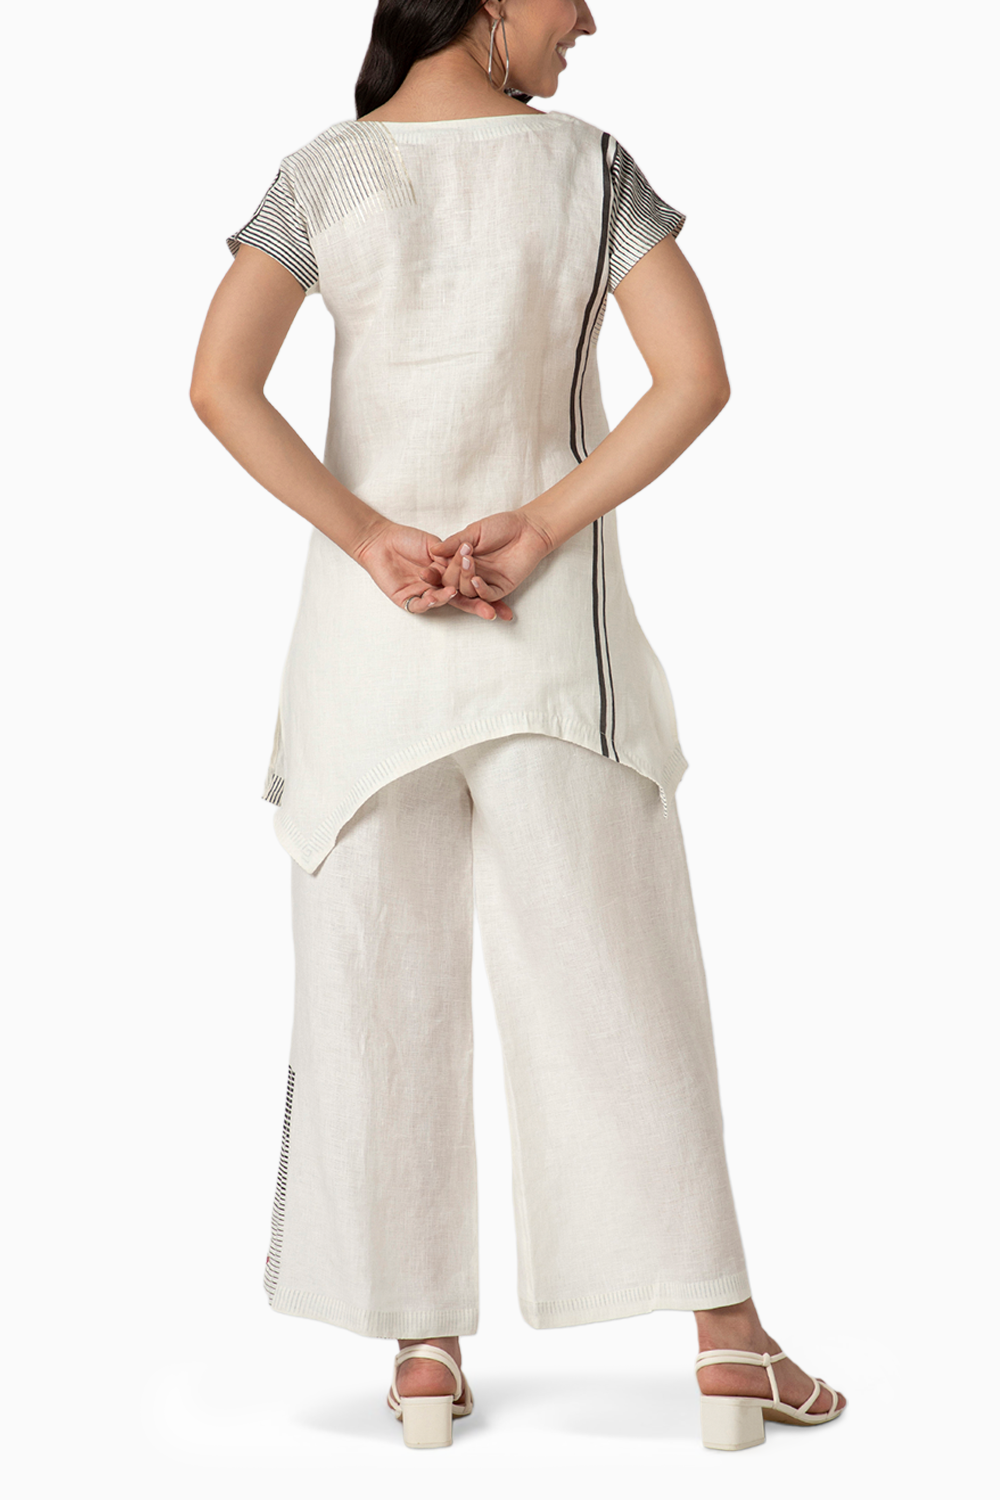 Brick by Brick Off White Noa Top and Pant